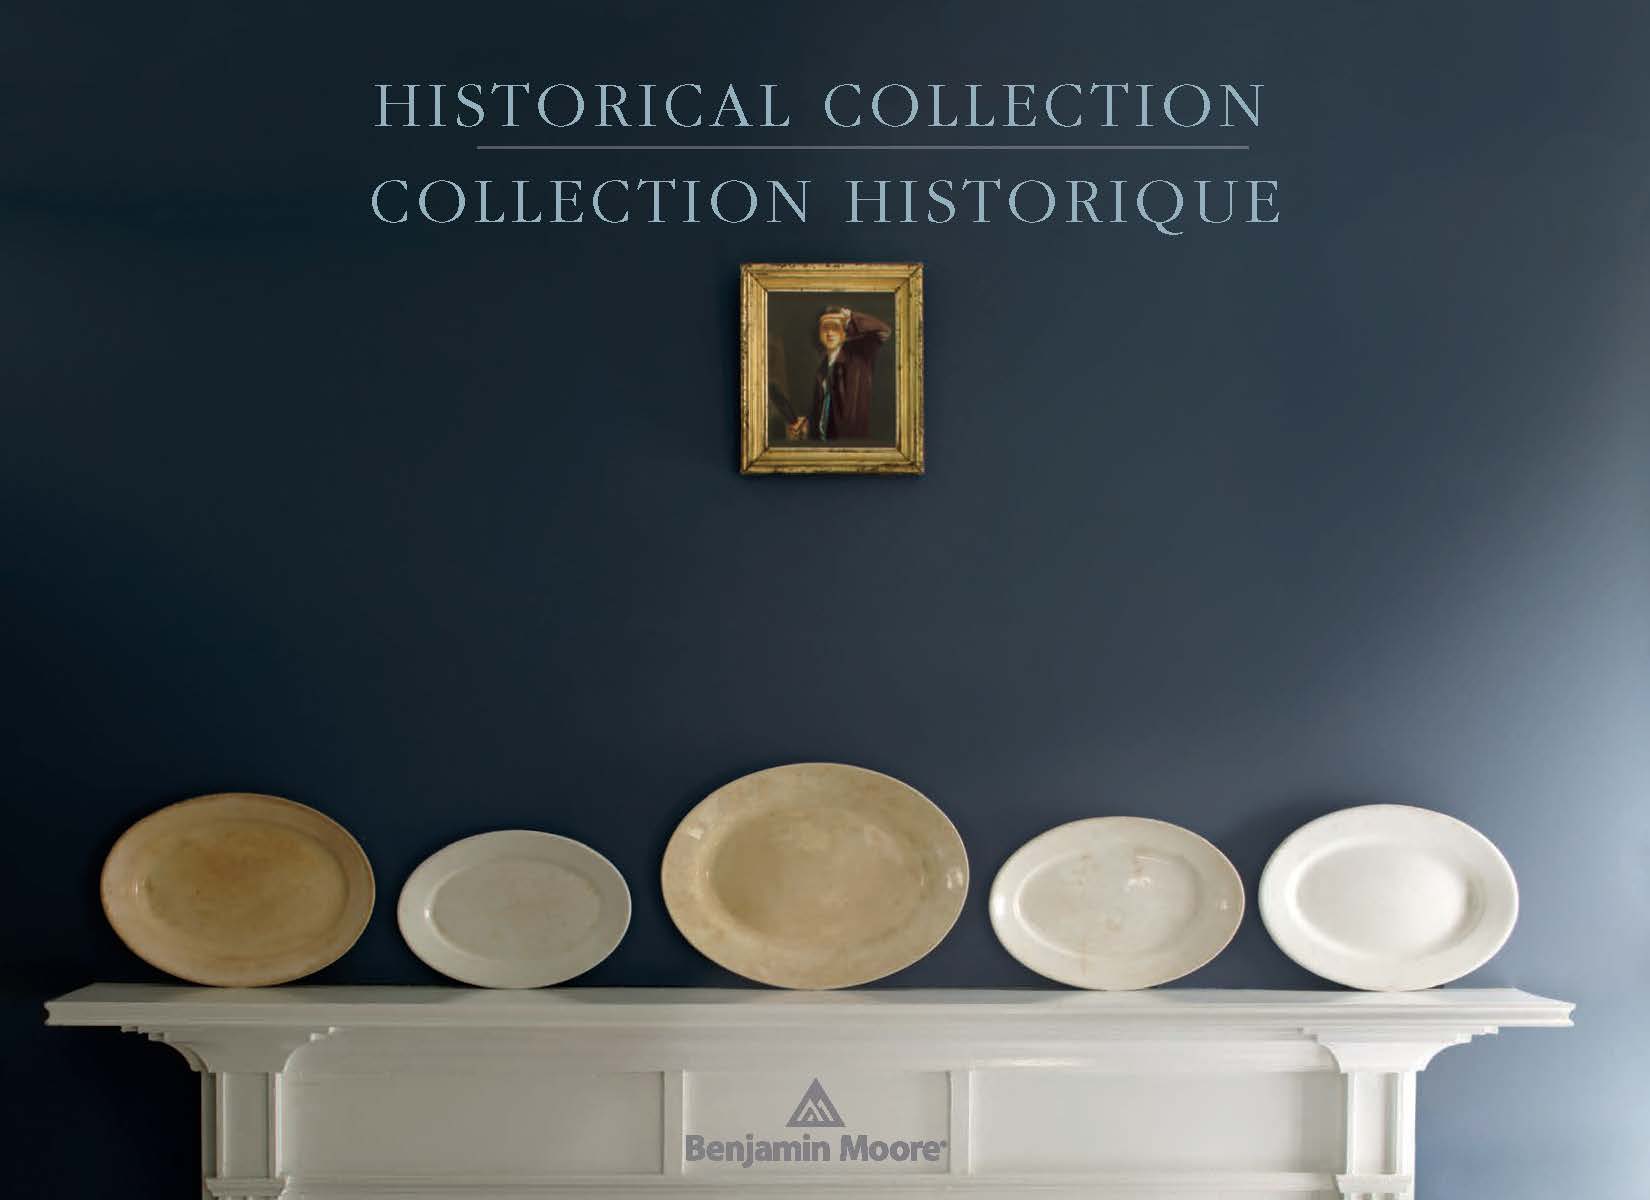 Benjamin Moore Catalog_Historical Collection Cover